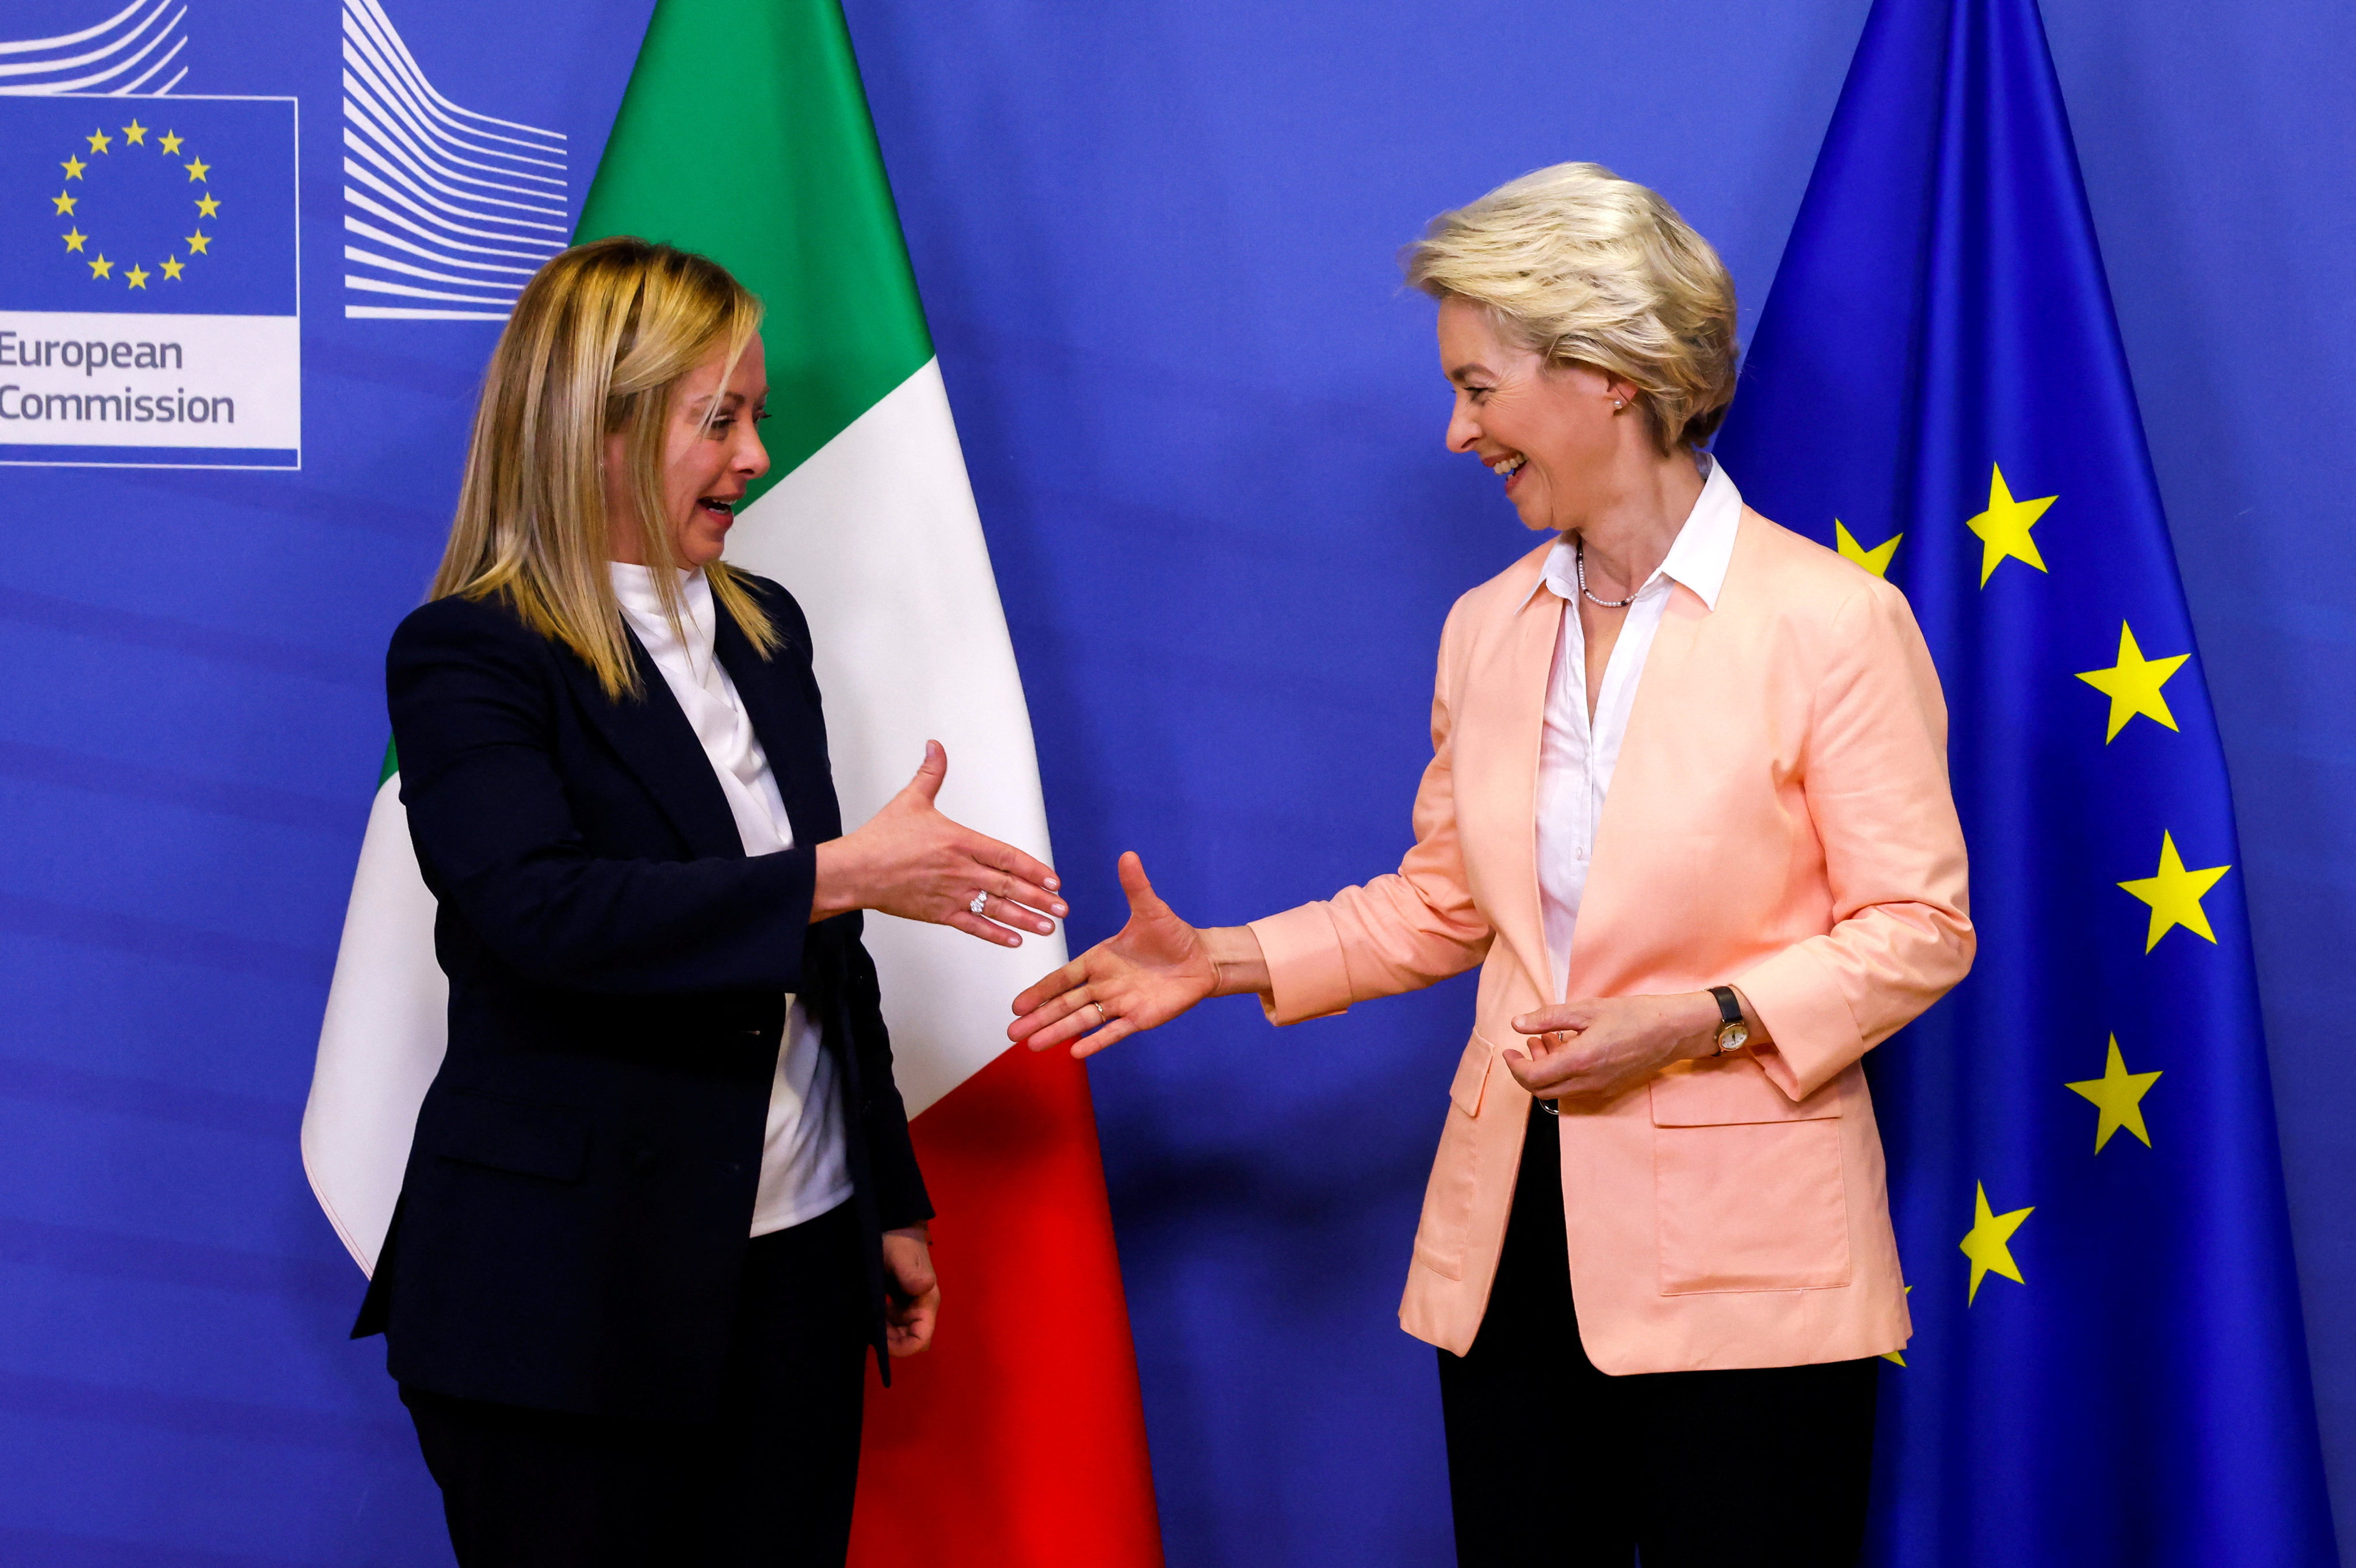 Italian Prime Minister Giorgia Meloni (left) and European Commission President Ursula von der Leyen shake hands at the EU Commission headquarters in Brussels on Thursday. Photo: Reuters